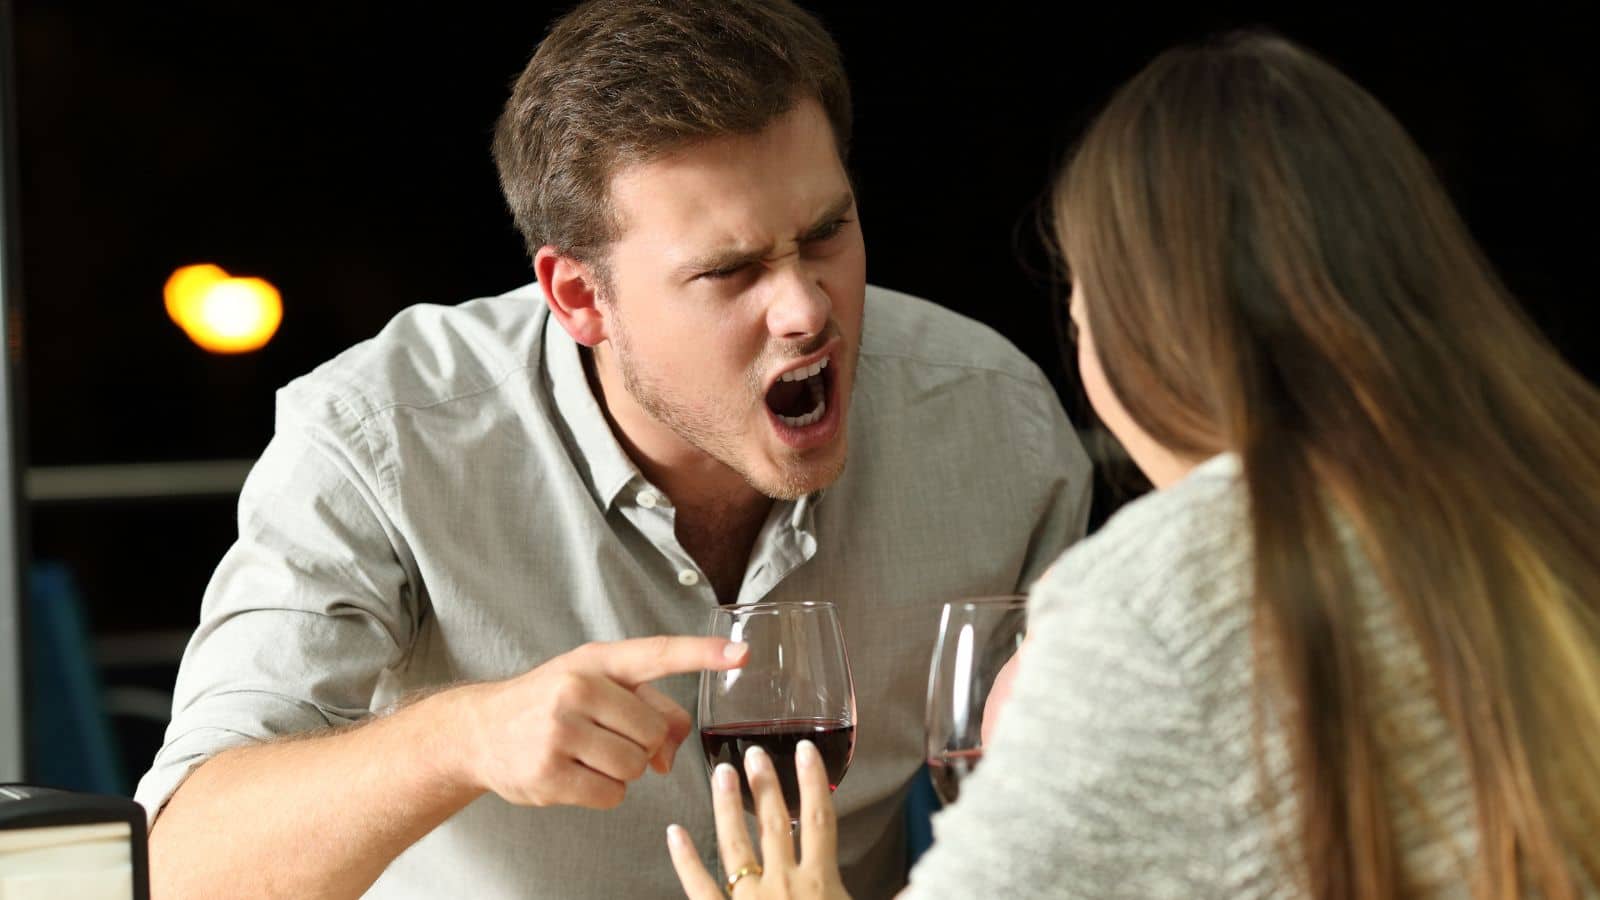 Couple Fighting at Dinner